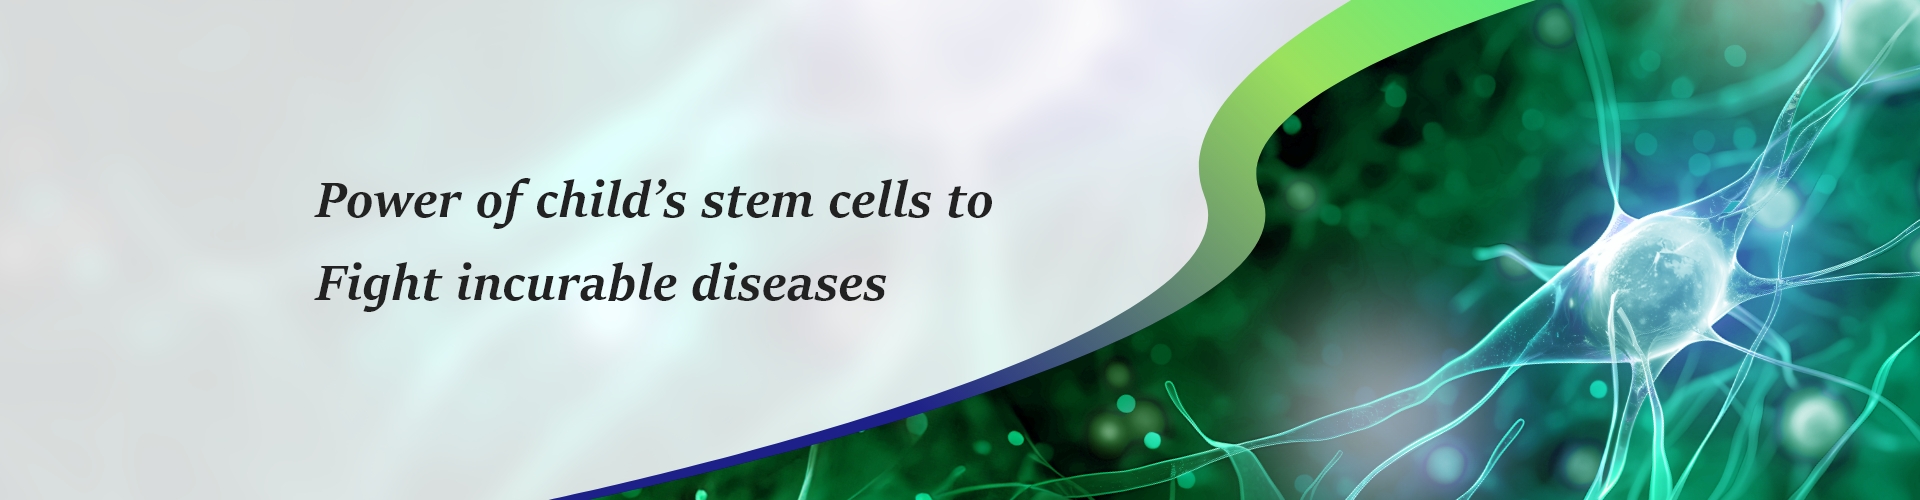 Power of child’s stem cells to Fight incurable diseases